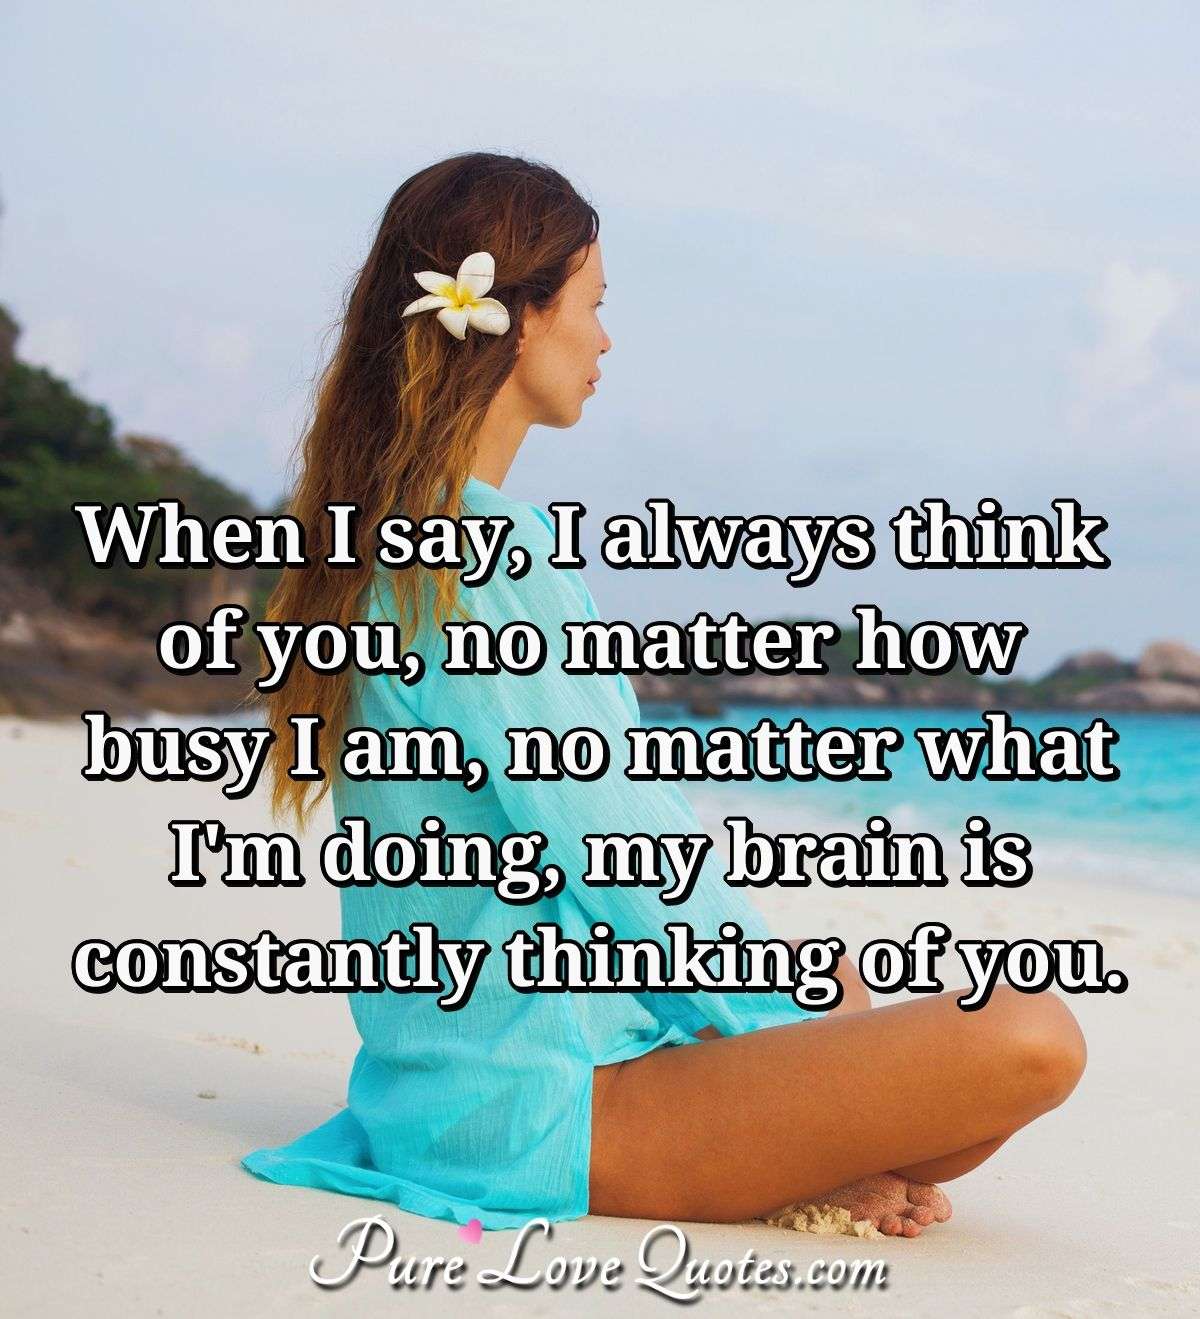 When I say, I always think of you, no matter how busy I am, no ...